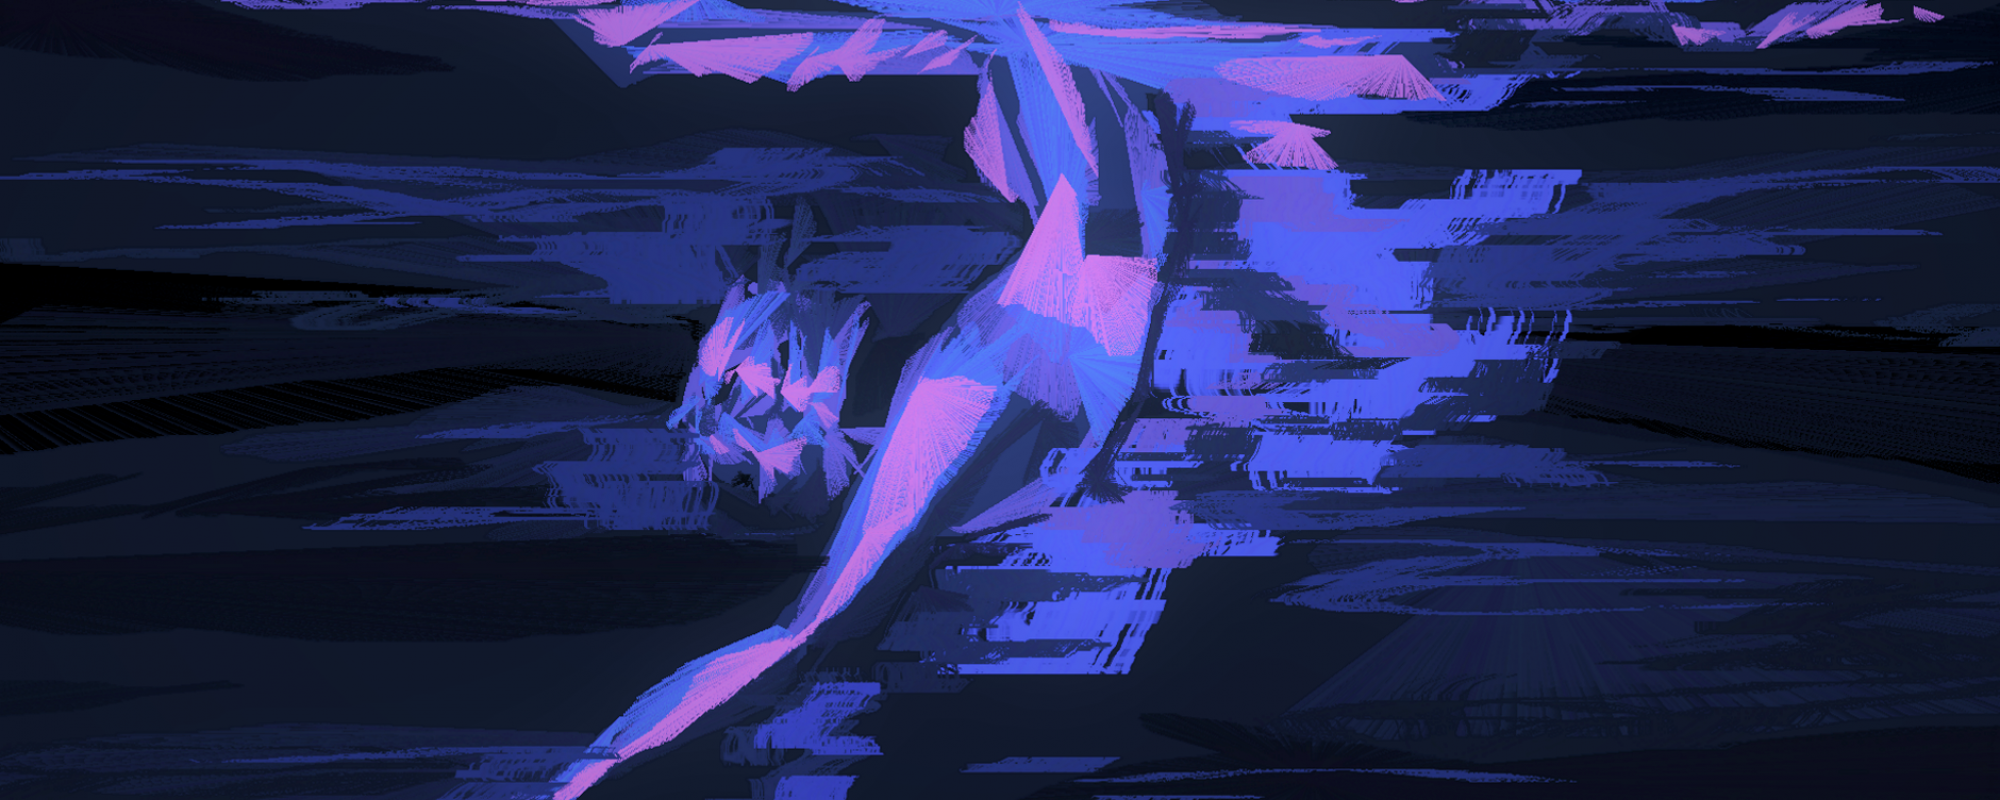 a blurred body, shaded in purple and blue, diving into dark waters